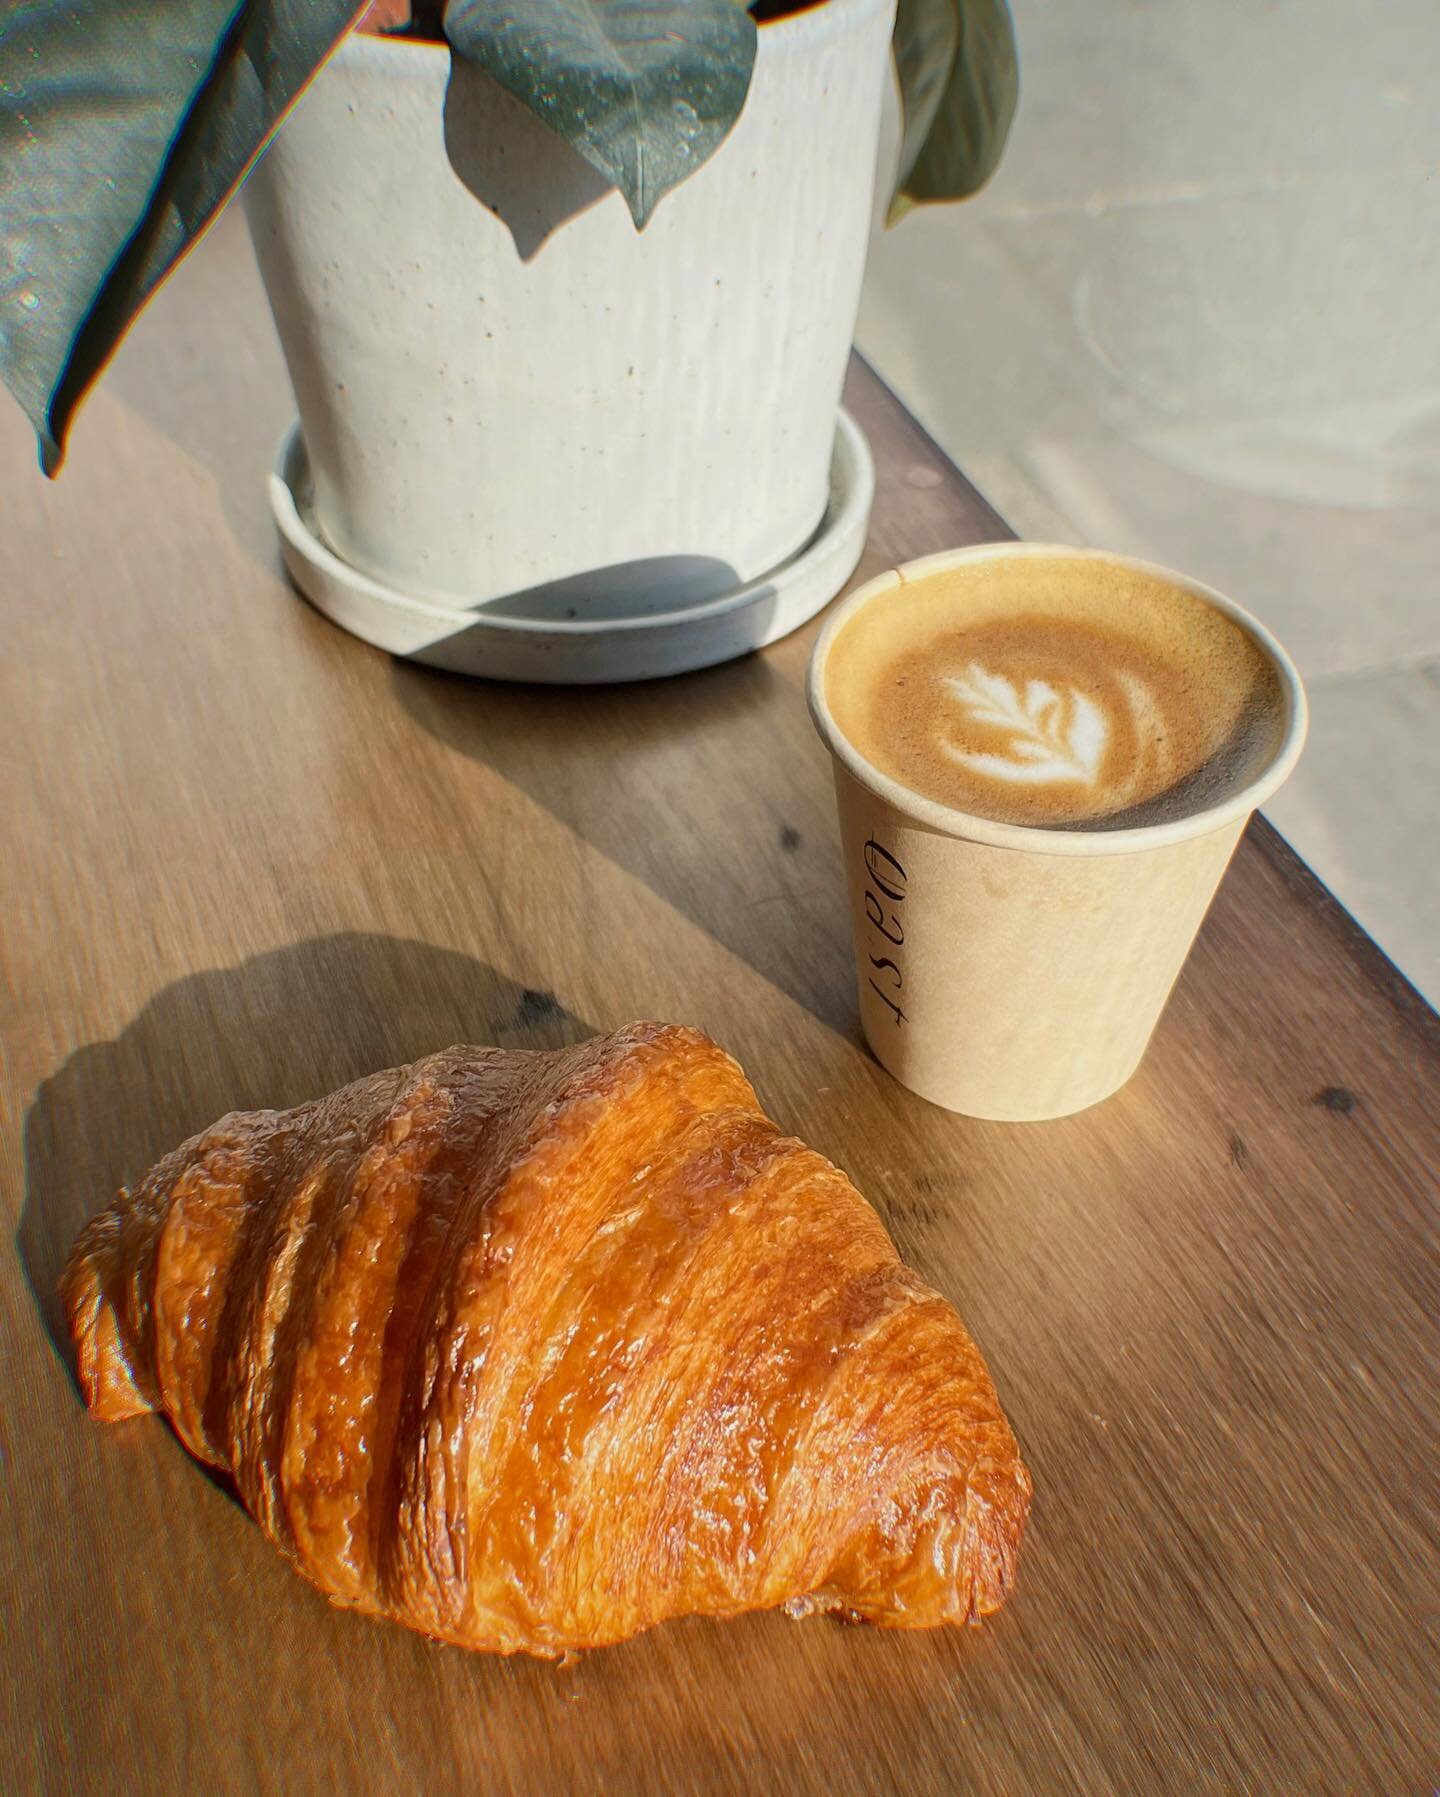 Coffee + a croissant ✌🏻 

Have you heard? If you come and see us thurs-fri then you can grab a coffee and a croissant (or pain au choc) for just &pound;5.

#margate #madeinmargate #croissant #coffee #offer #cliftonville #thanet #northdownroad #bread